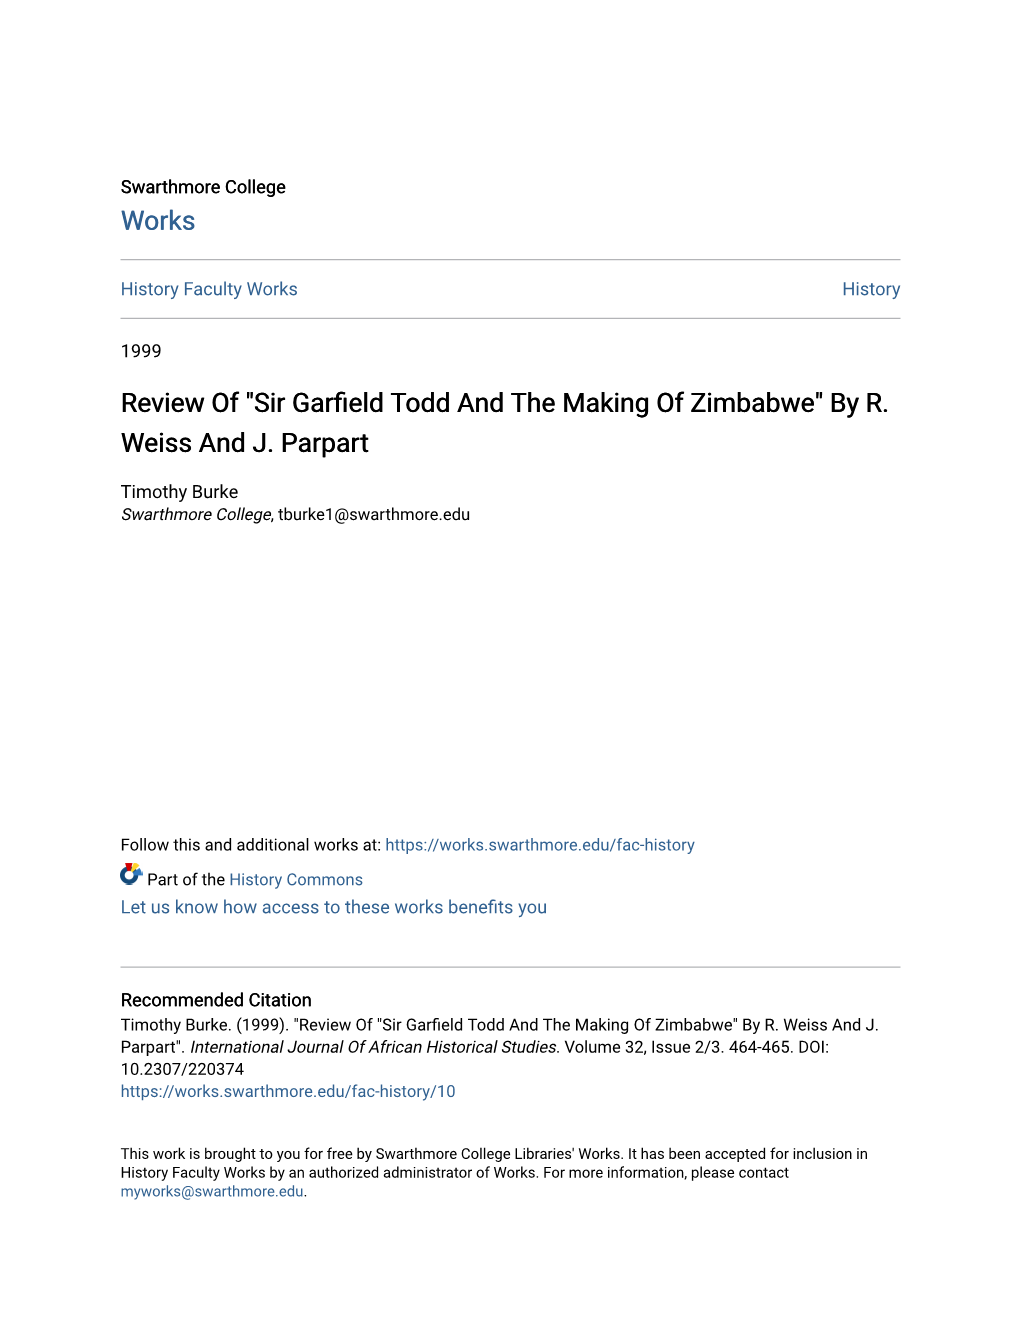 Review Of" Sir Garfield Todd and the Making of Zimbabwe" by R. Weiss